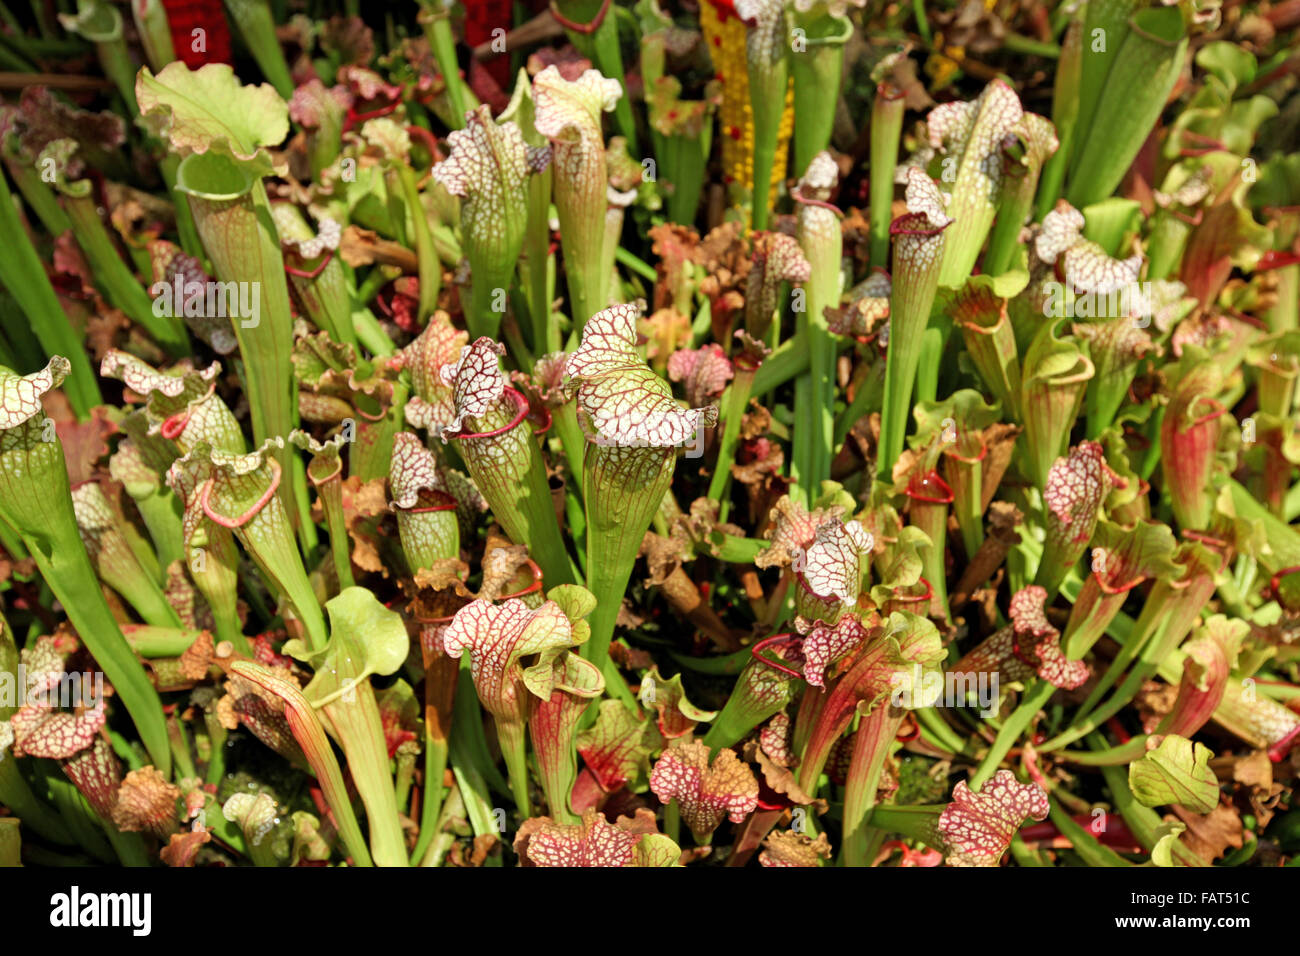 A group of pitcher plants growing together Stock Photo